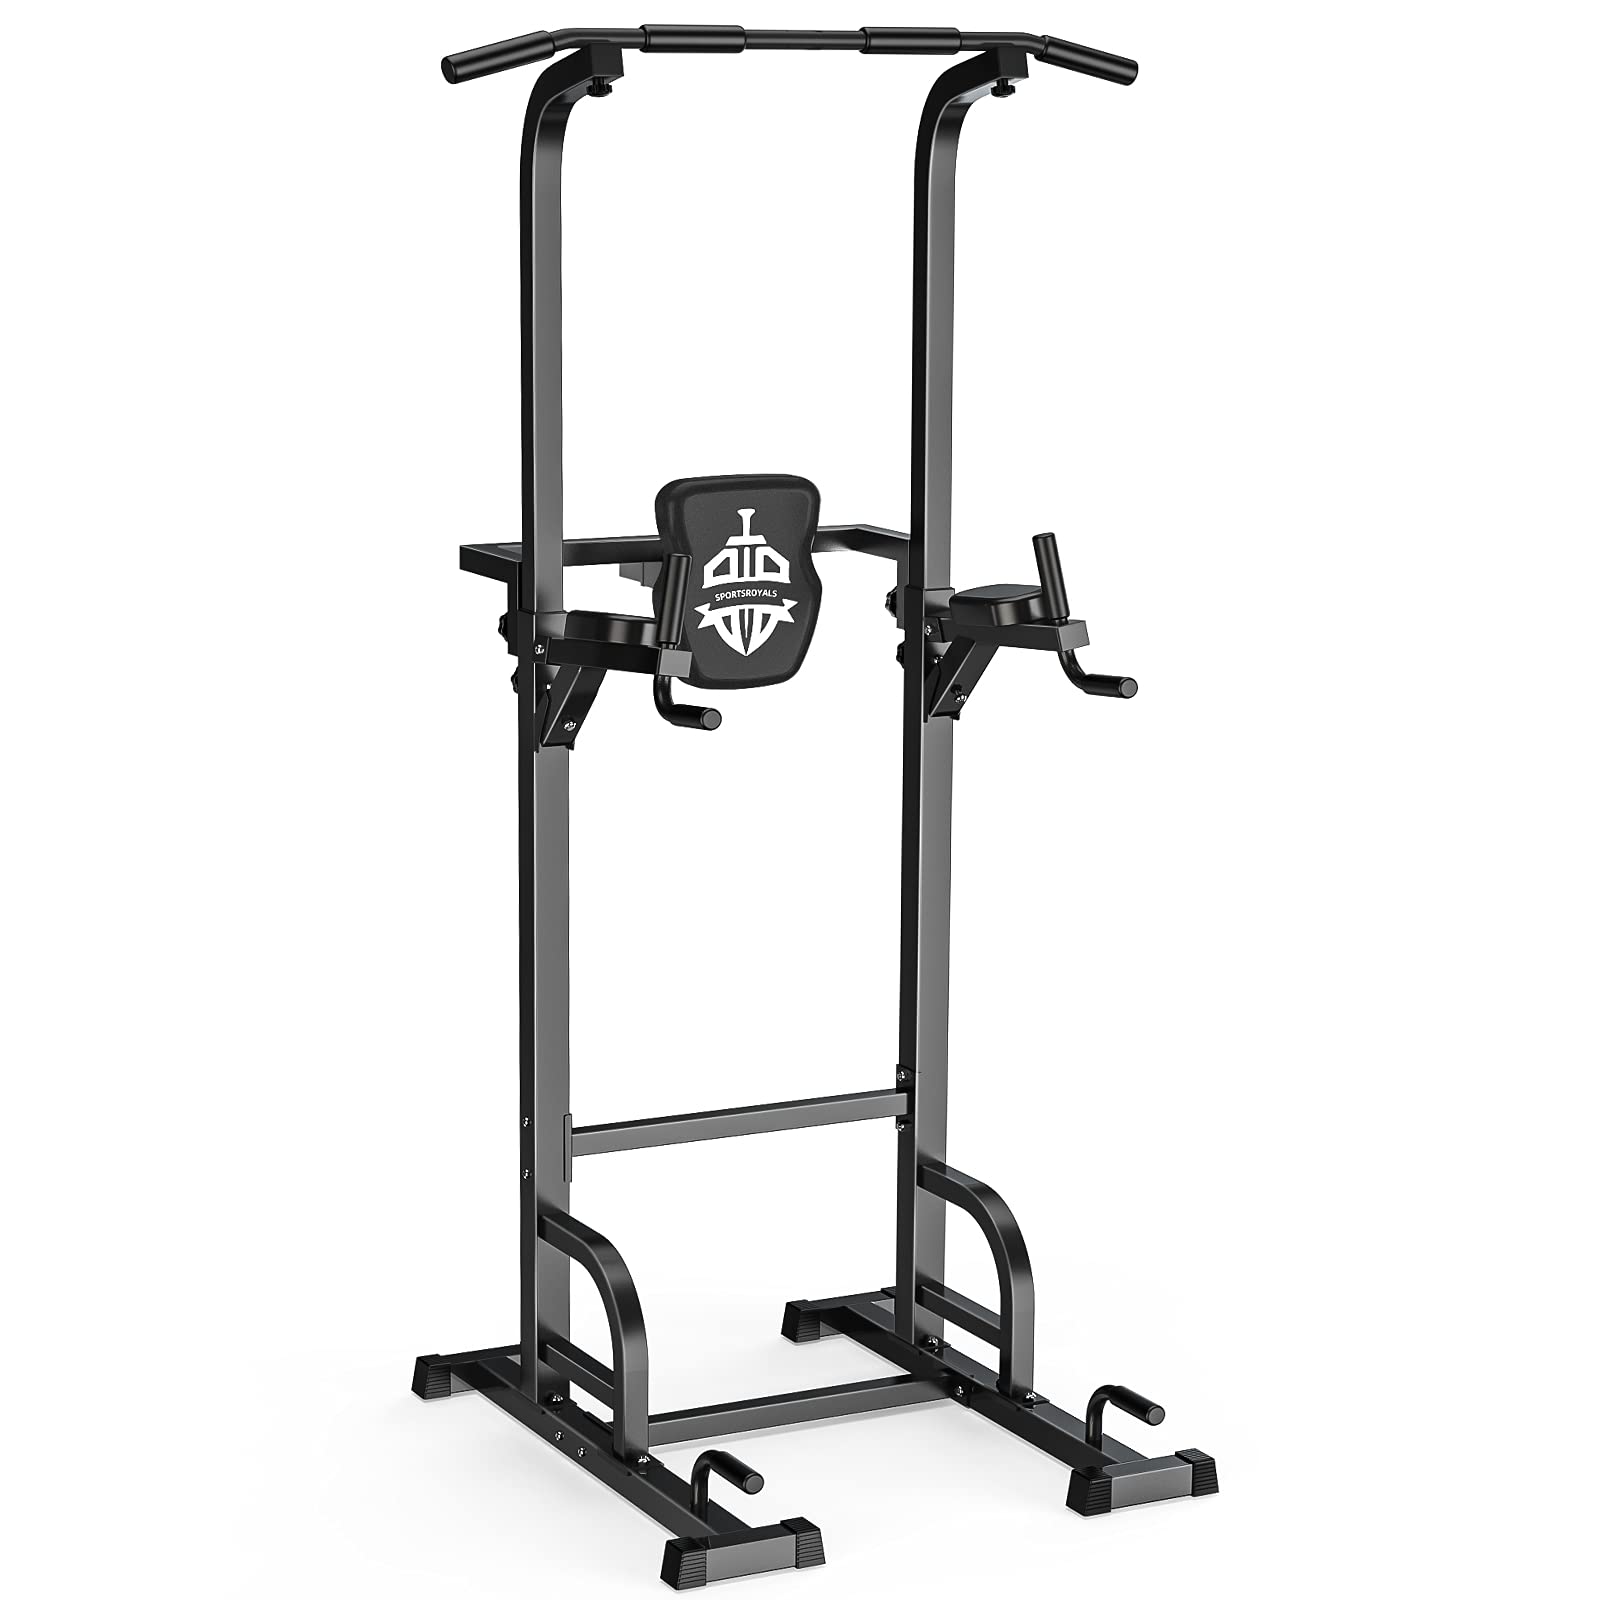 Sportsroyals Power Tower Dip Station Pull Up Bar for Home gym Strength Training Workout Equipment, 400LBS